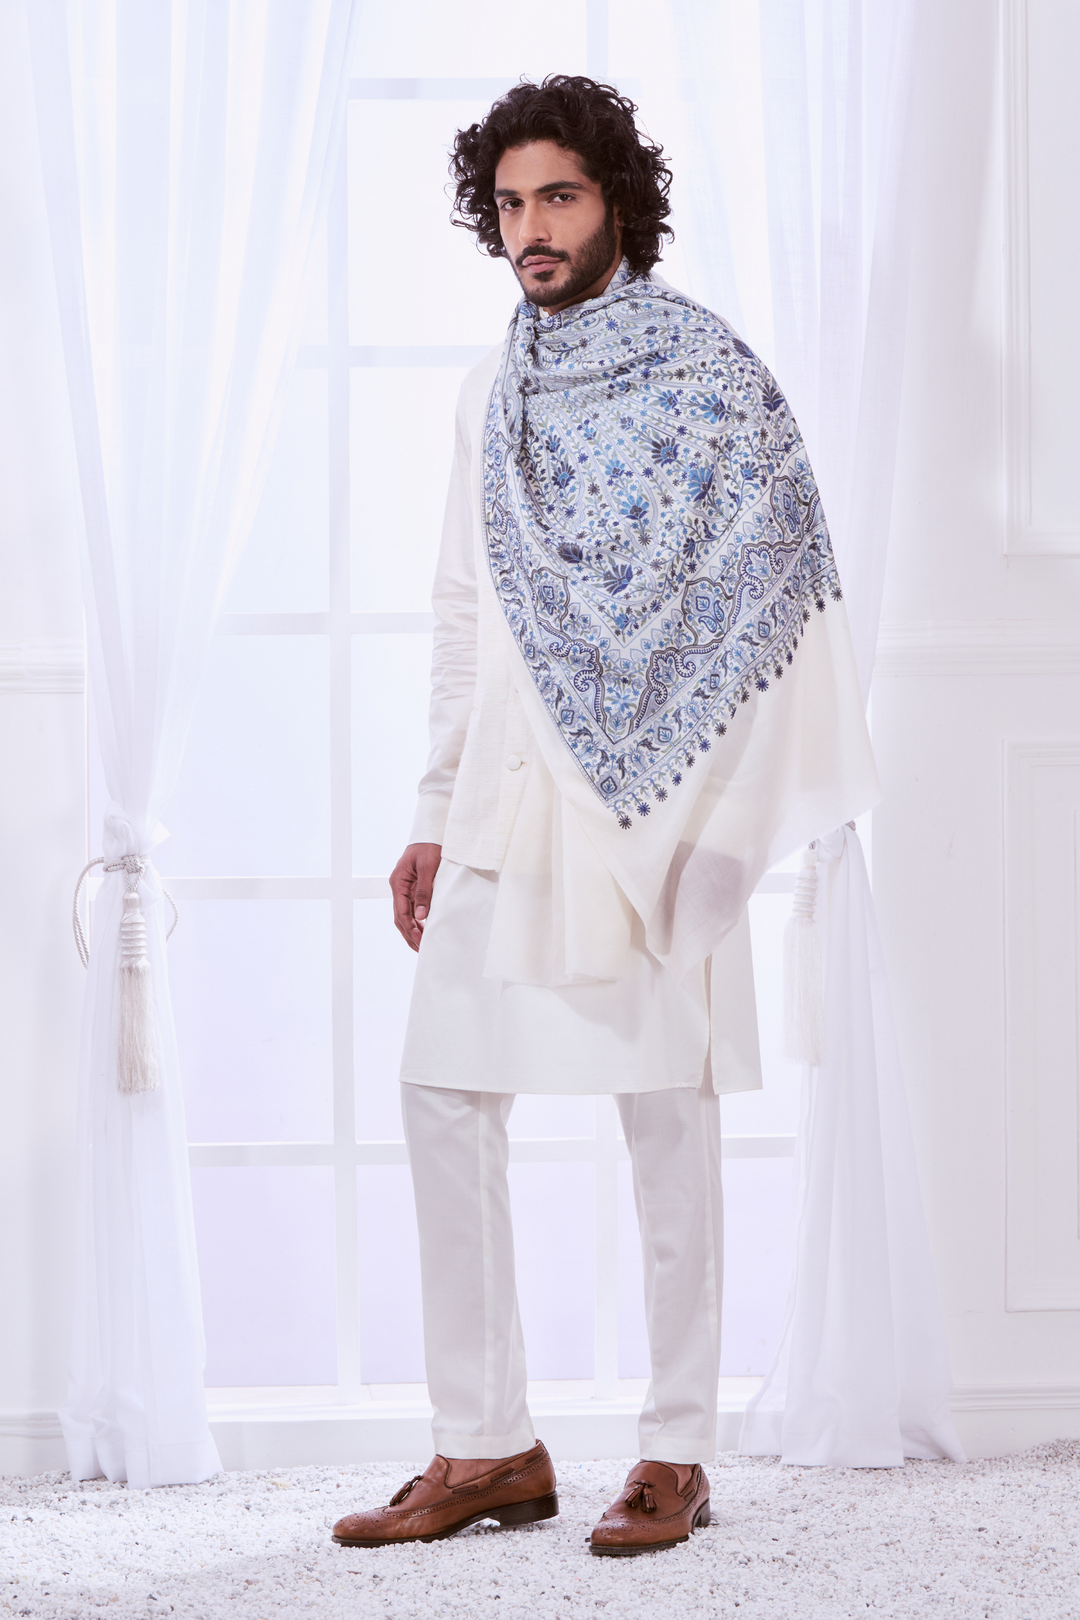 Men's Embroidered Wool Scarf